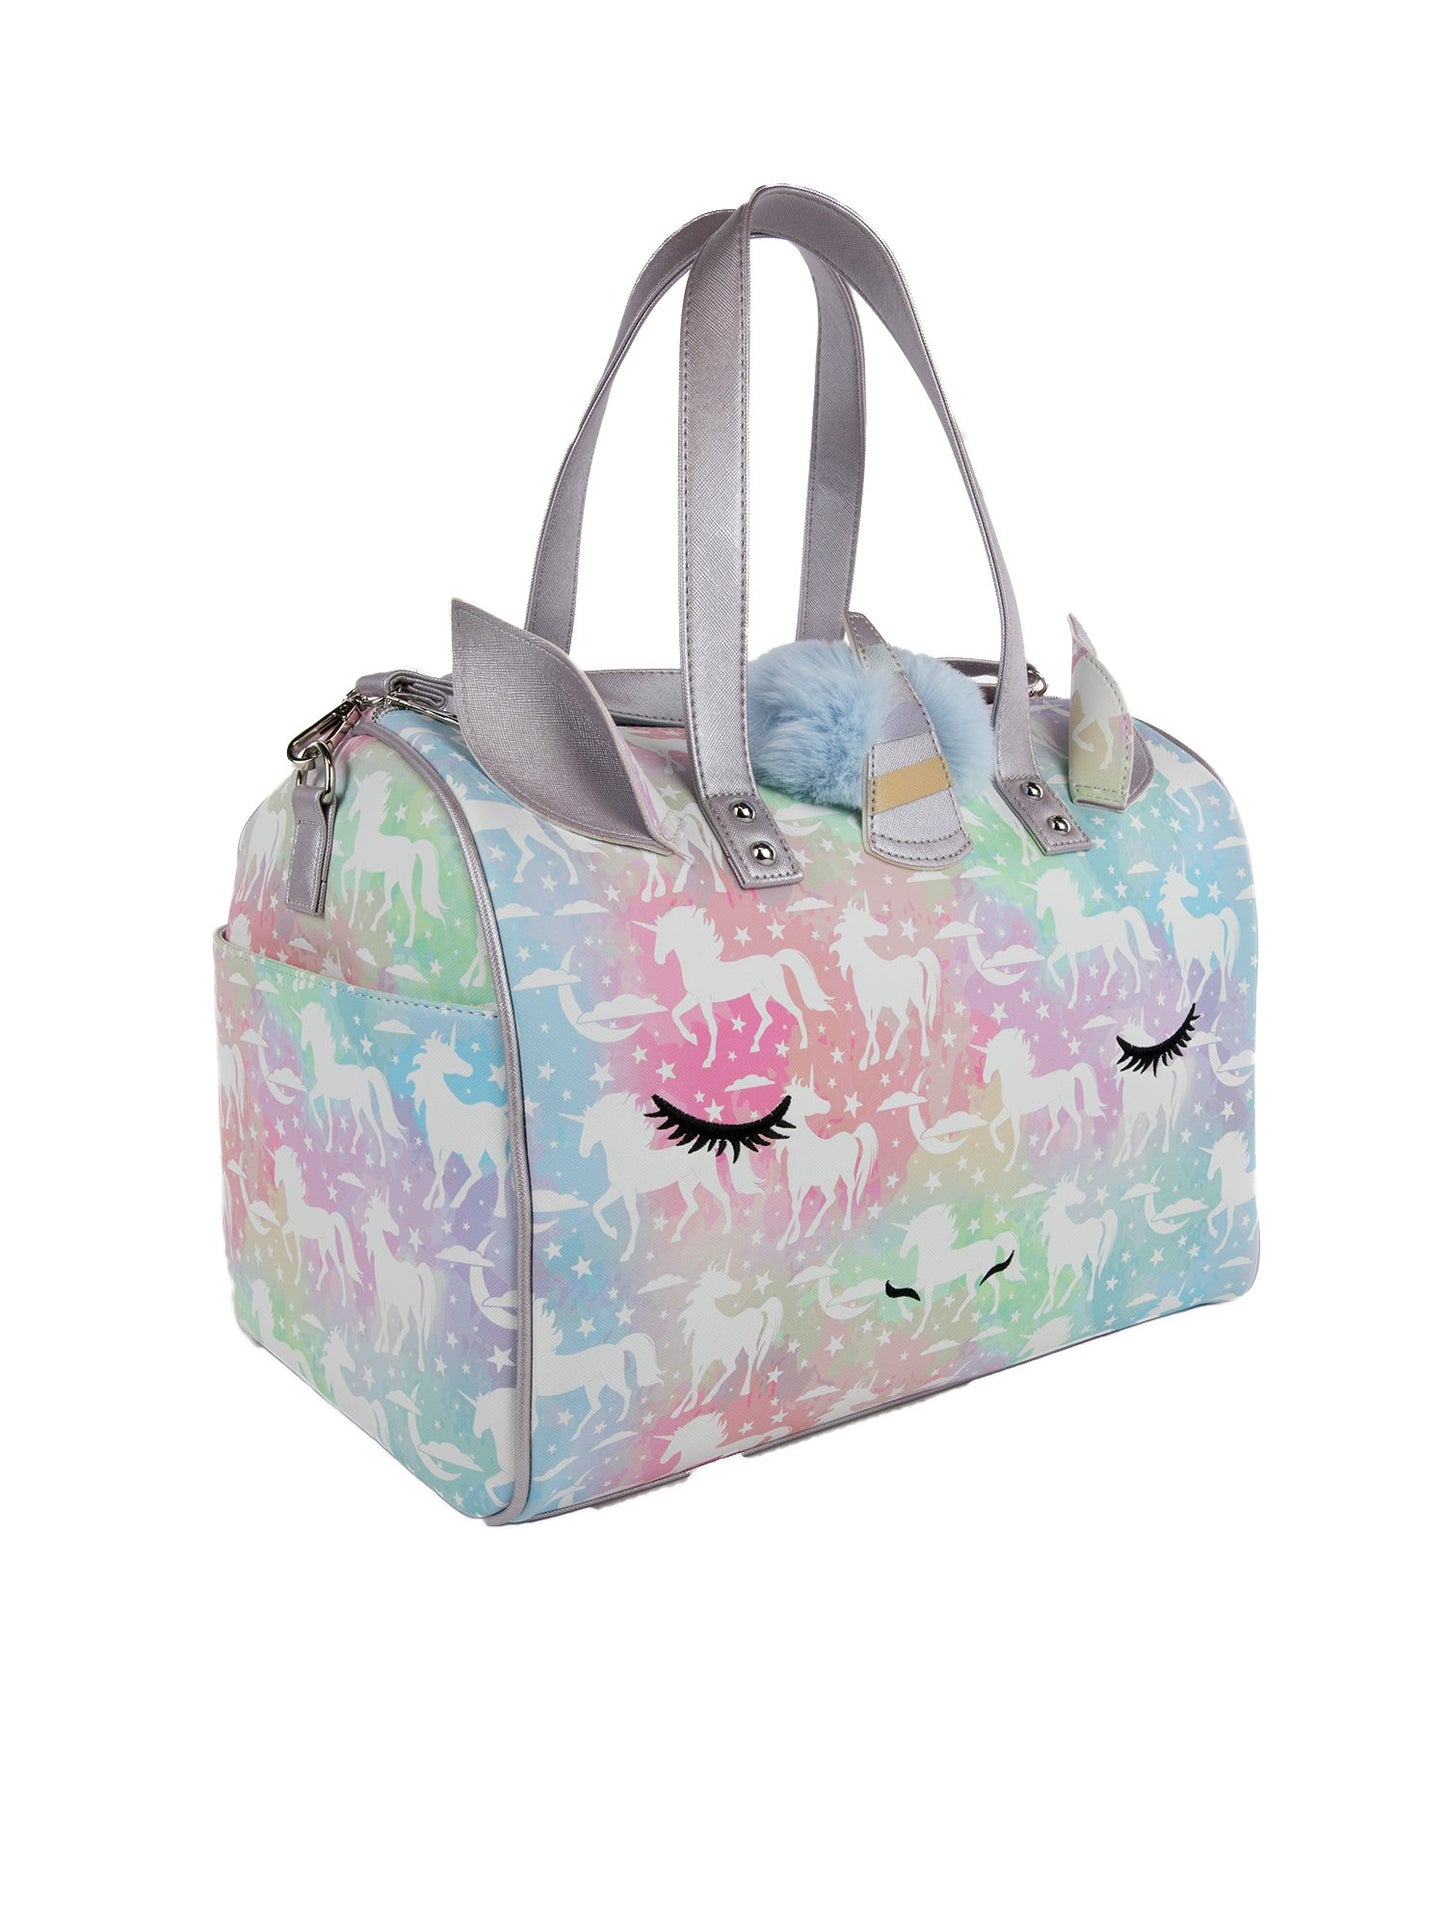 Under One Sky, Accessories, Host Pickunder One Sky Unicorn Weekender  Duffel Bag Gold Accents Pink Multi